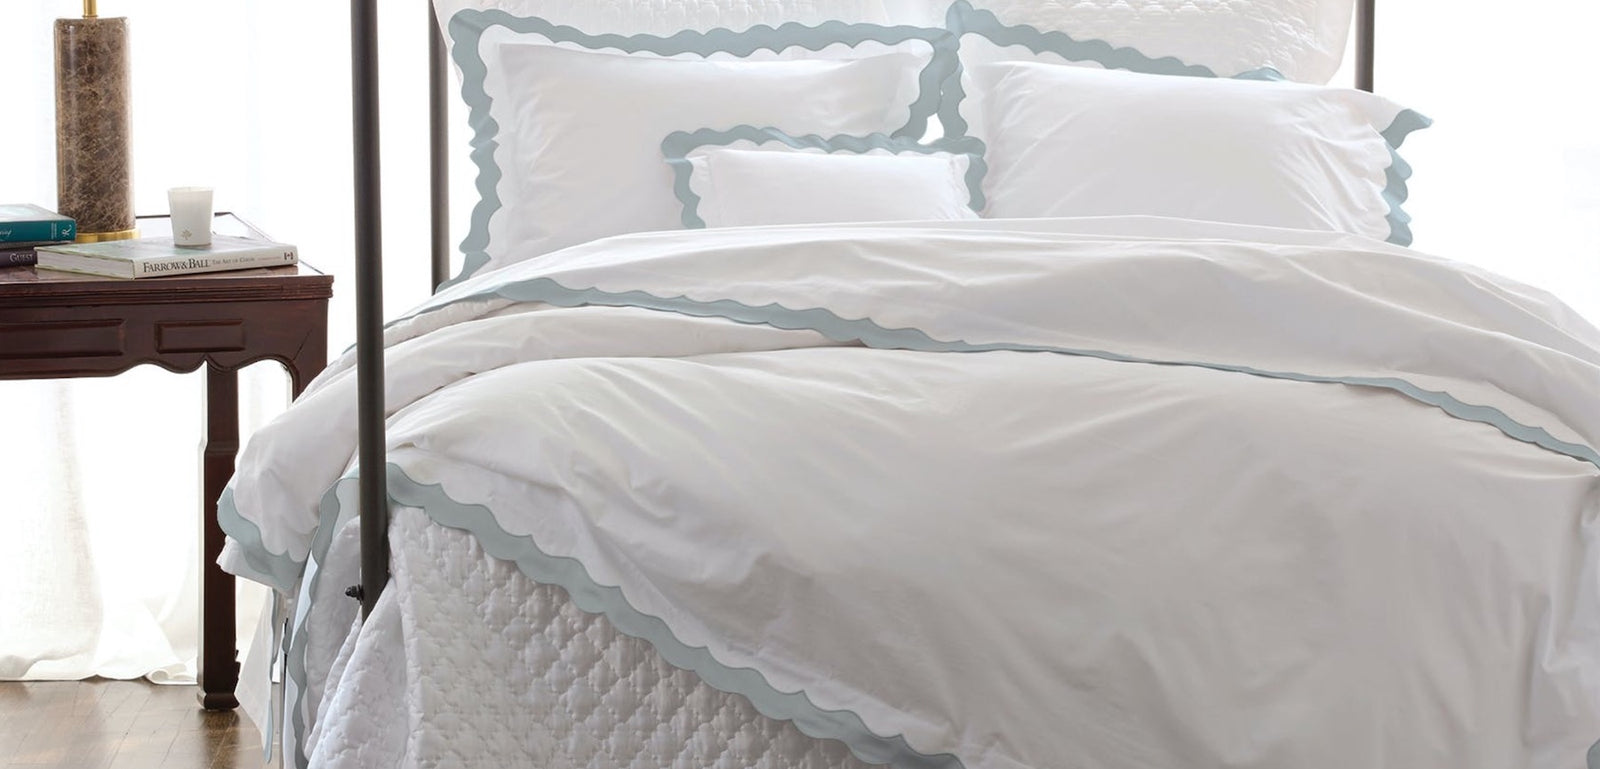 Matouk Bedding at Fig Linens and Home. Lorelei Duvet Covers, Sheets, Pillowcases and Pillow Shams. Matouk Lorelei is white cotton Milano Percale with a Sateen Scalloped Band. Colors include Hazy Blue, Pool, Silver, Pink, Violet, Light Blue, Champagne.